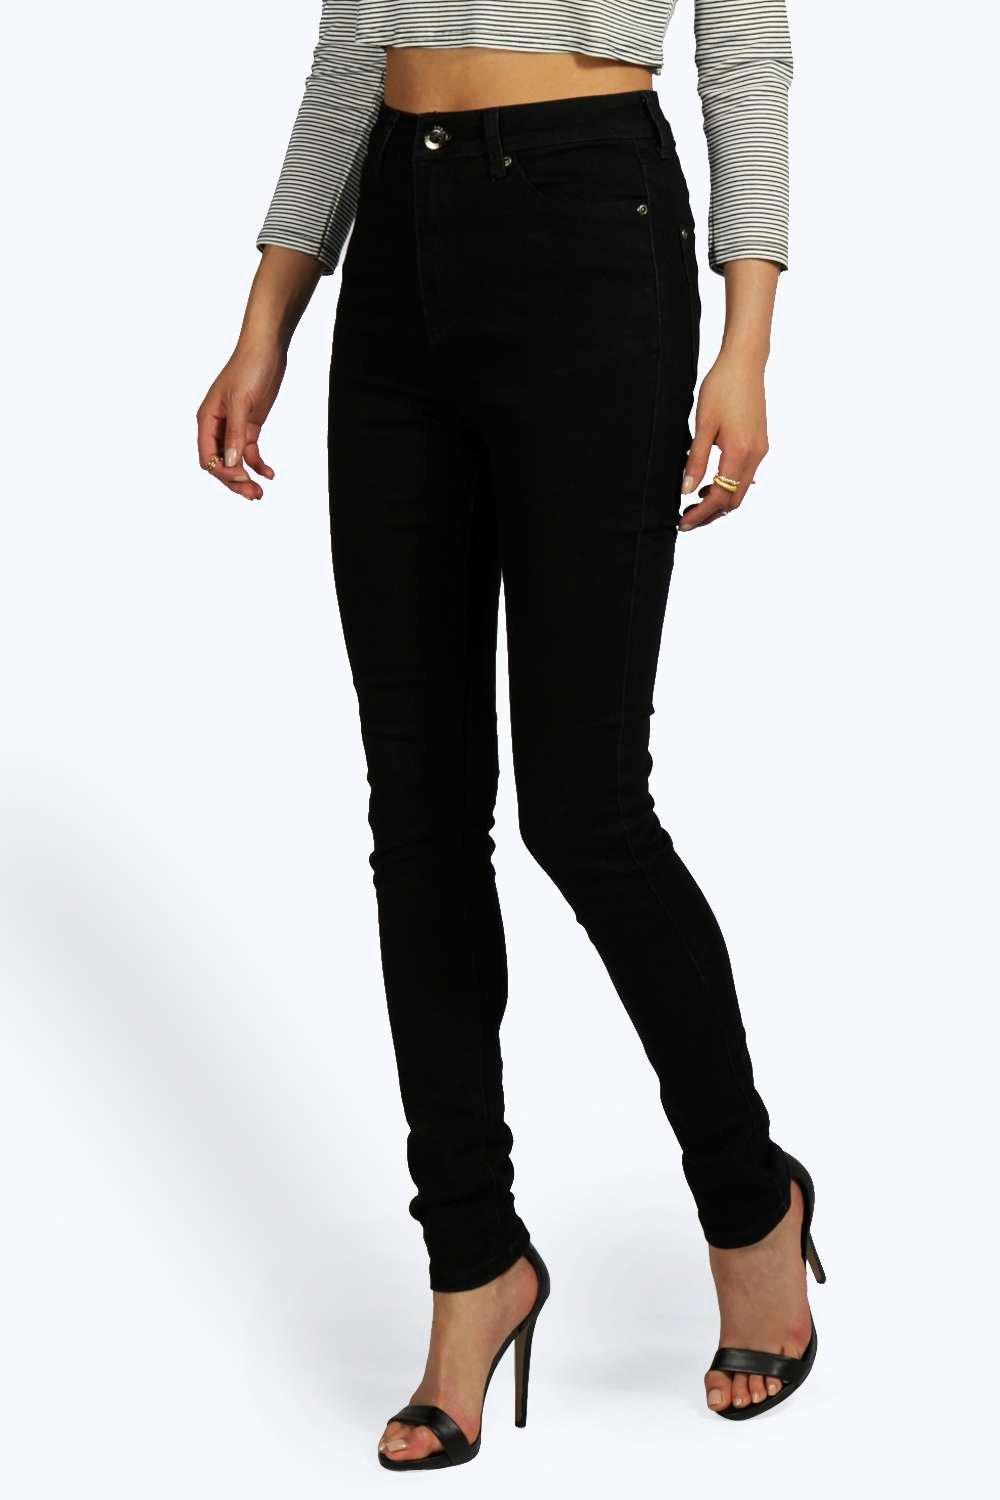 Lyst - Boohoo High Waisted Classic Stretch Skinny Jeans in Black